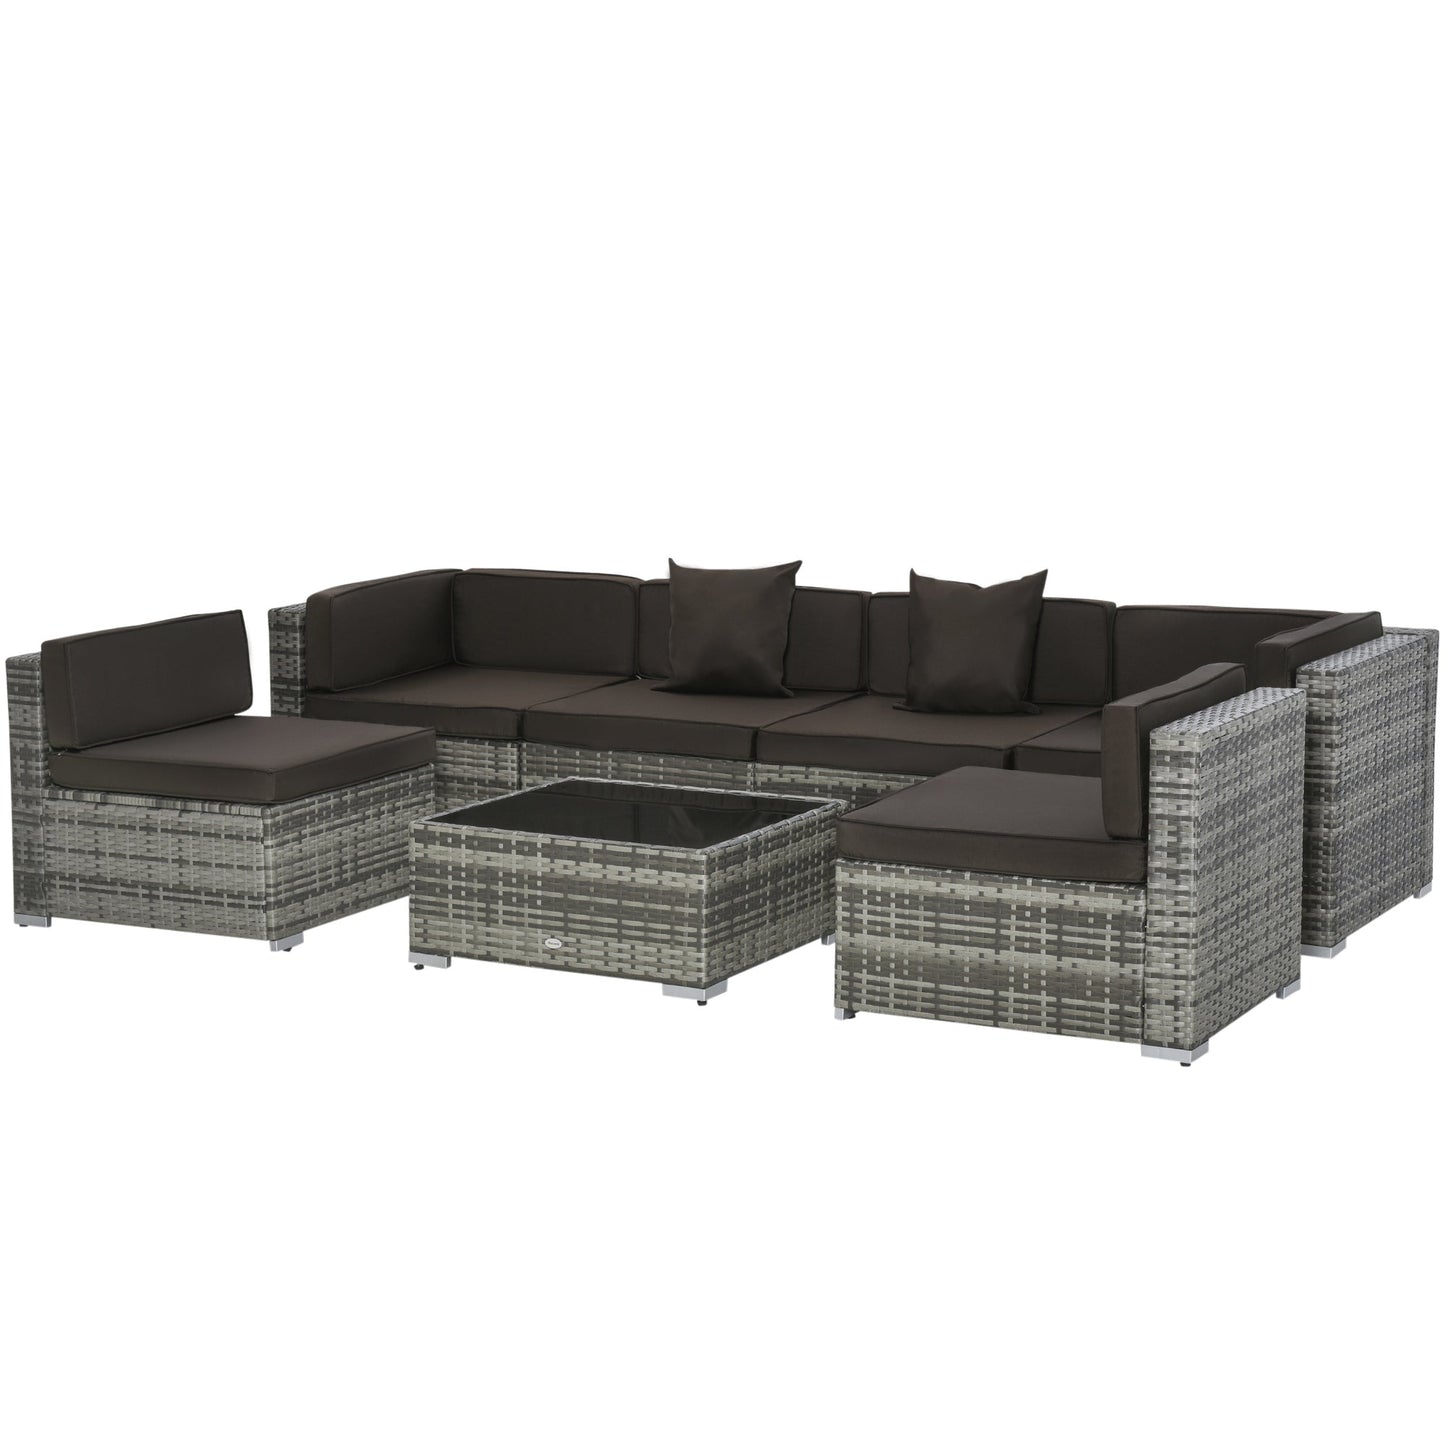 Outdoor and Garden-7-Piece Patio Furniture Sets Outdoor Wicker Conversation Sets PE Rattan Sectional sofa set with Cushions & Tempered Glass Desktop, Charcoal - Outdoor Style Company